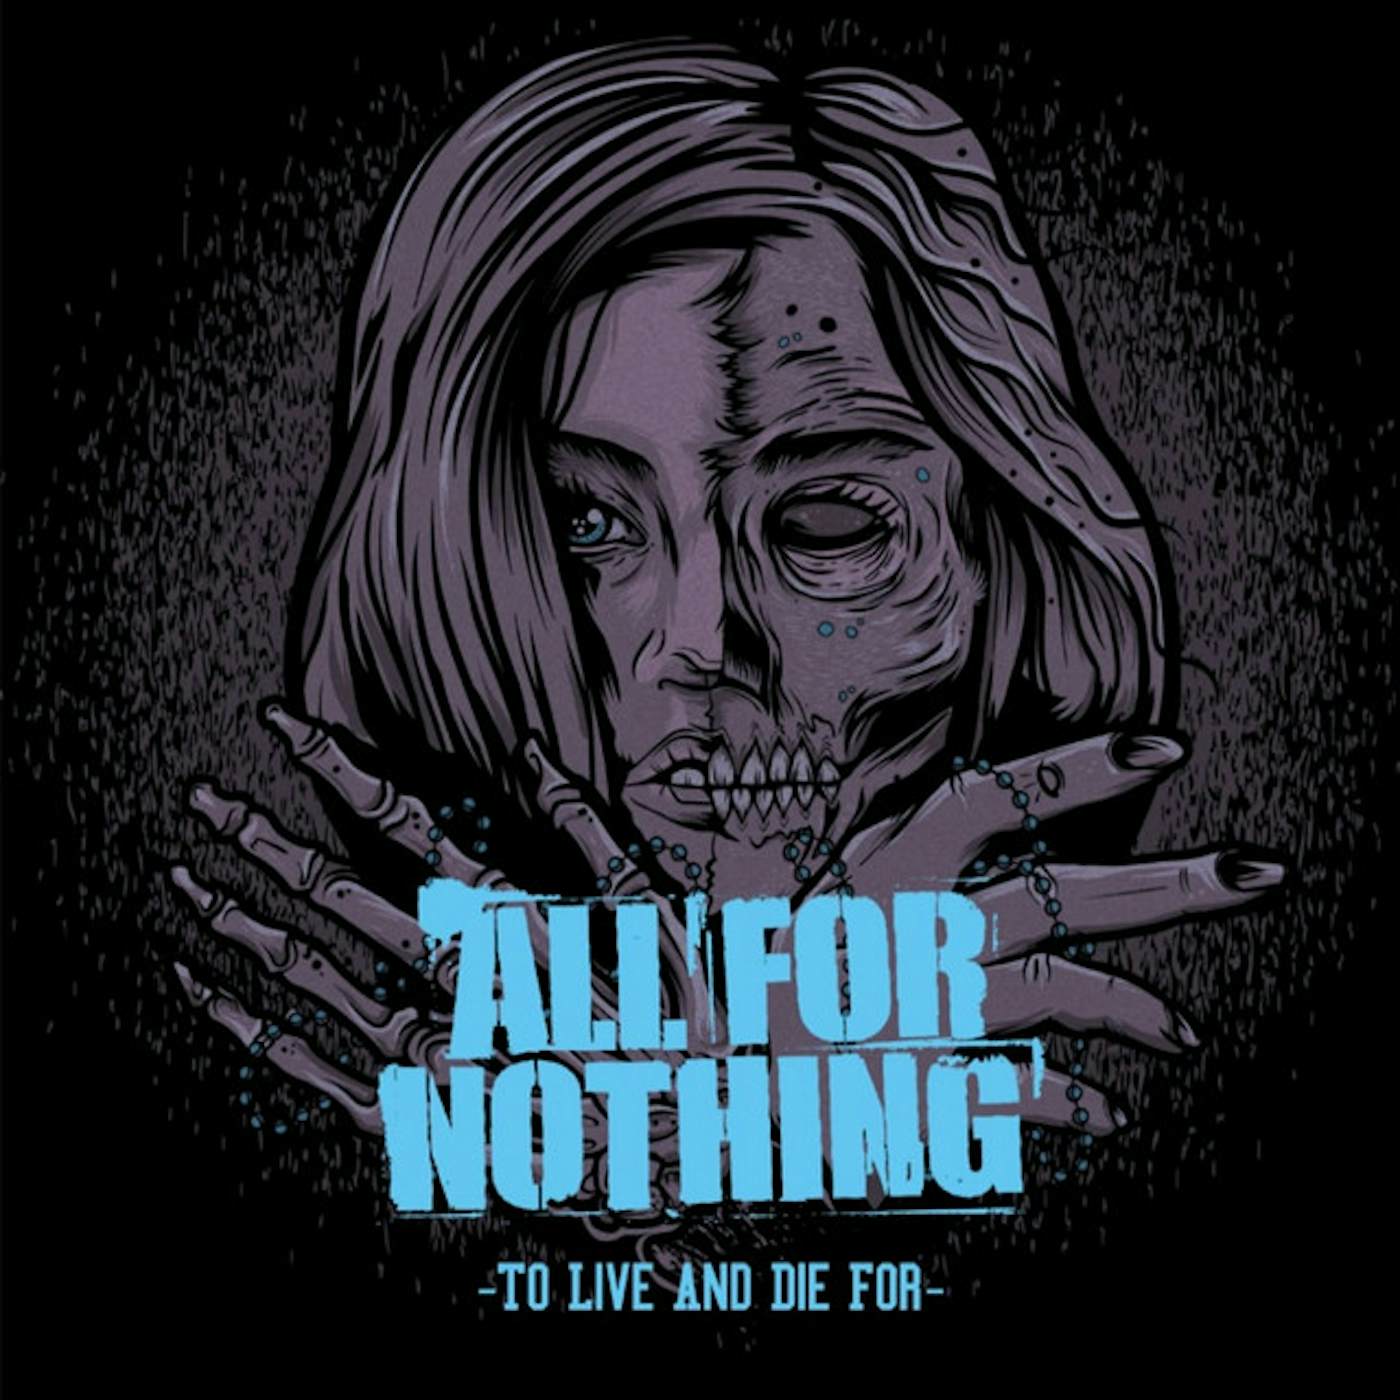 All For Nothing To Live and Die For Vinyl Record